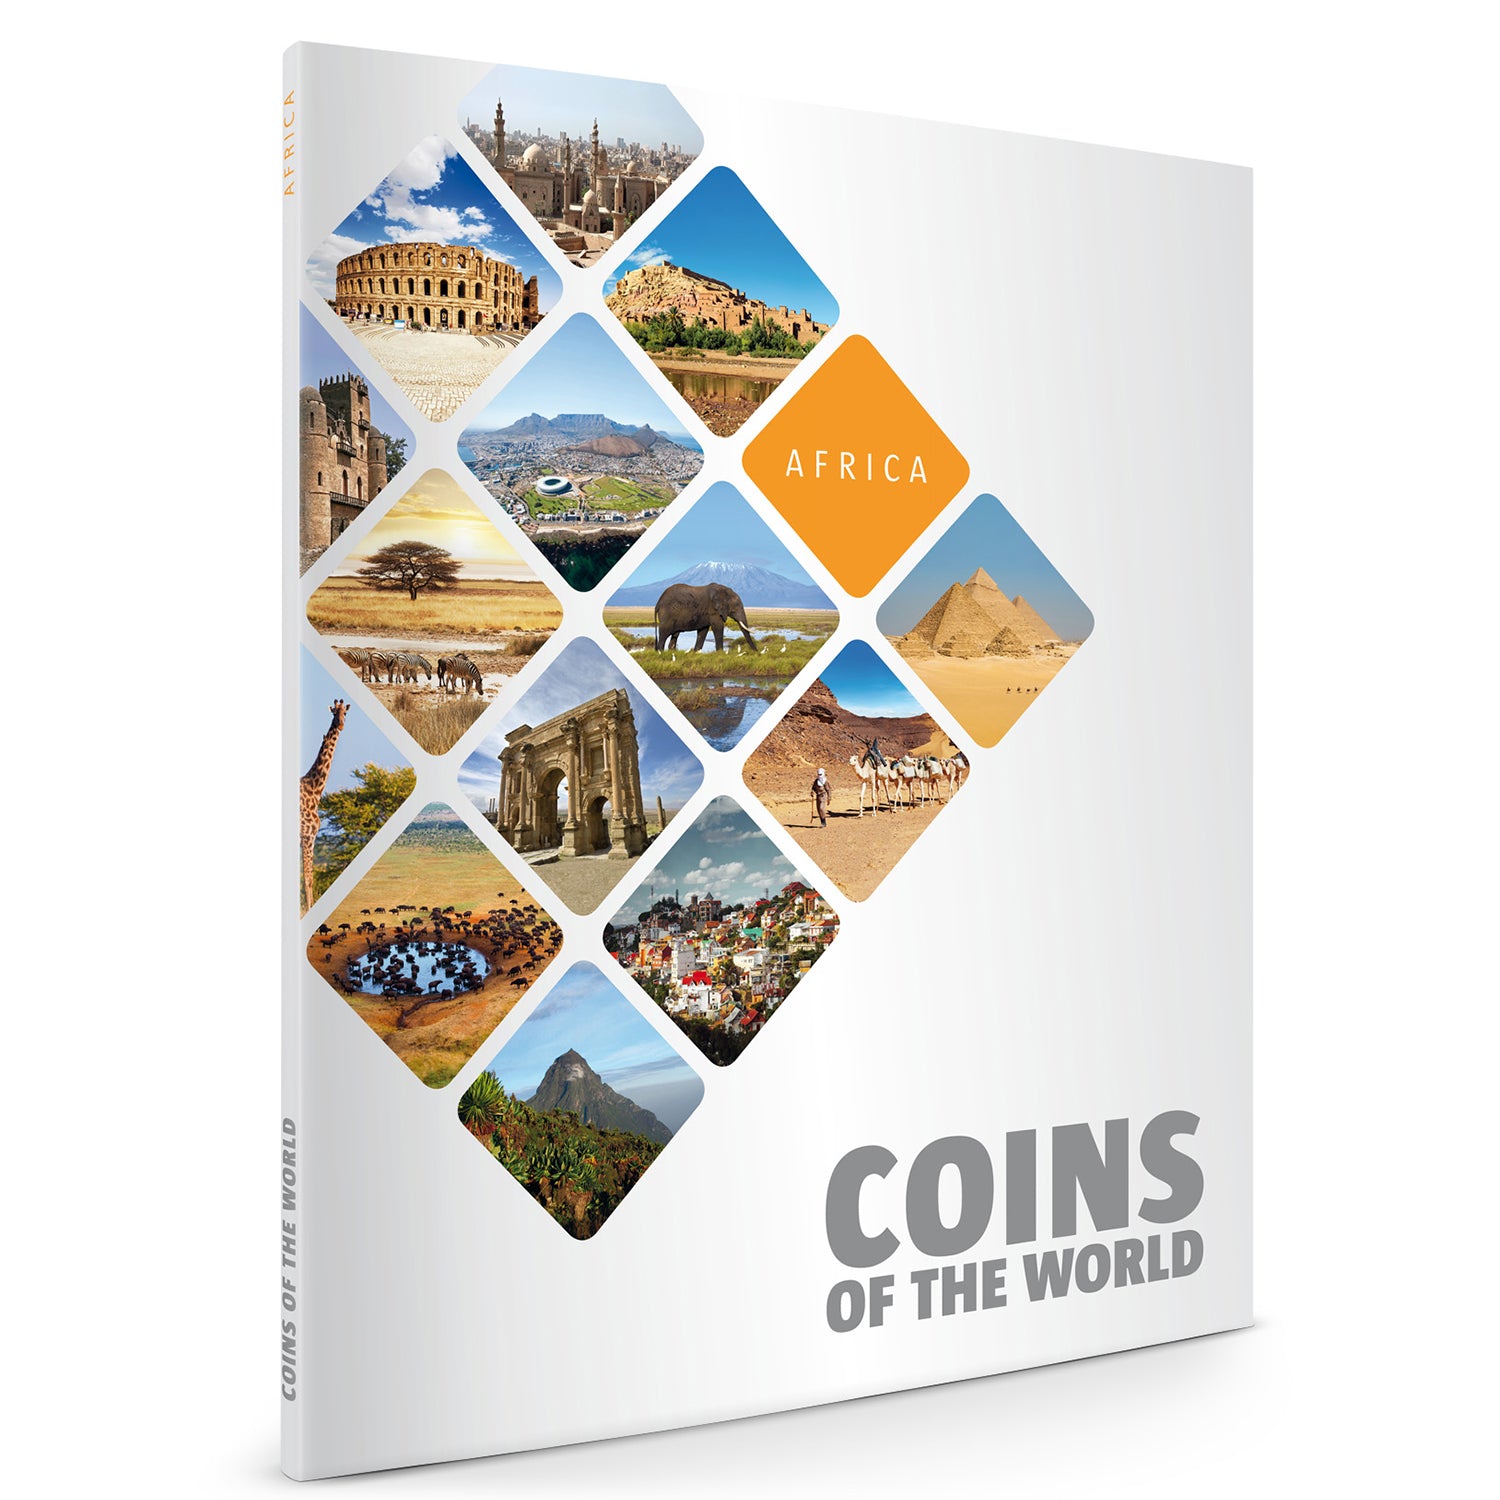 Coins of the World | Africa